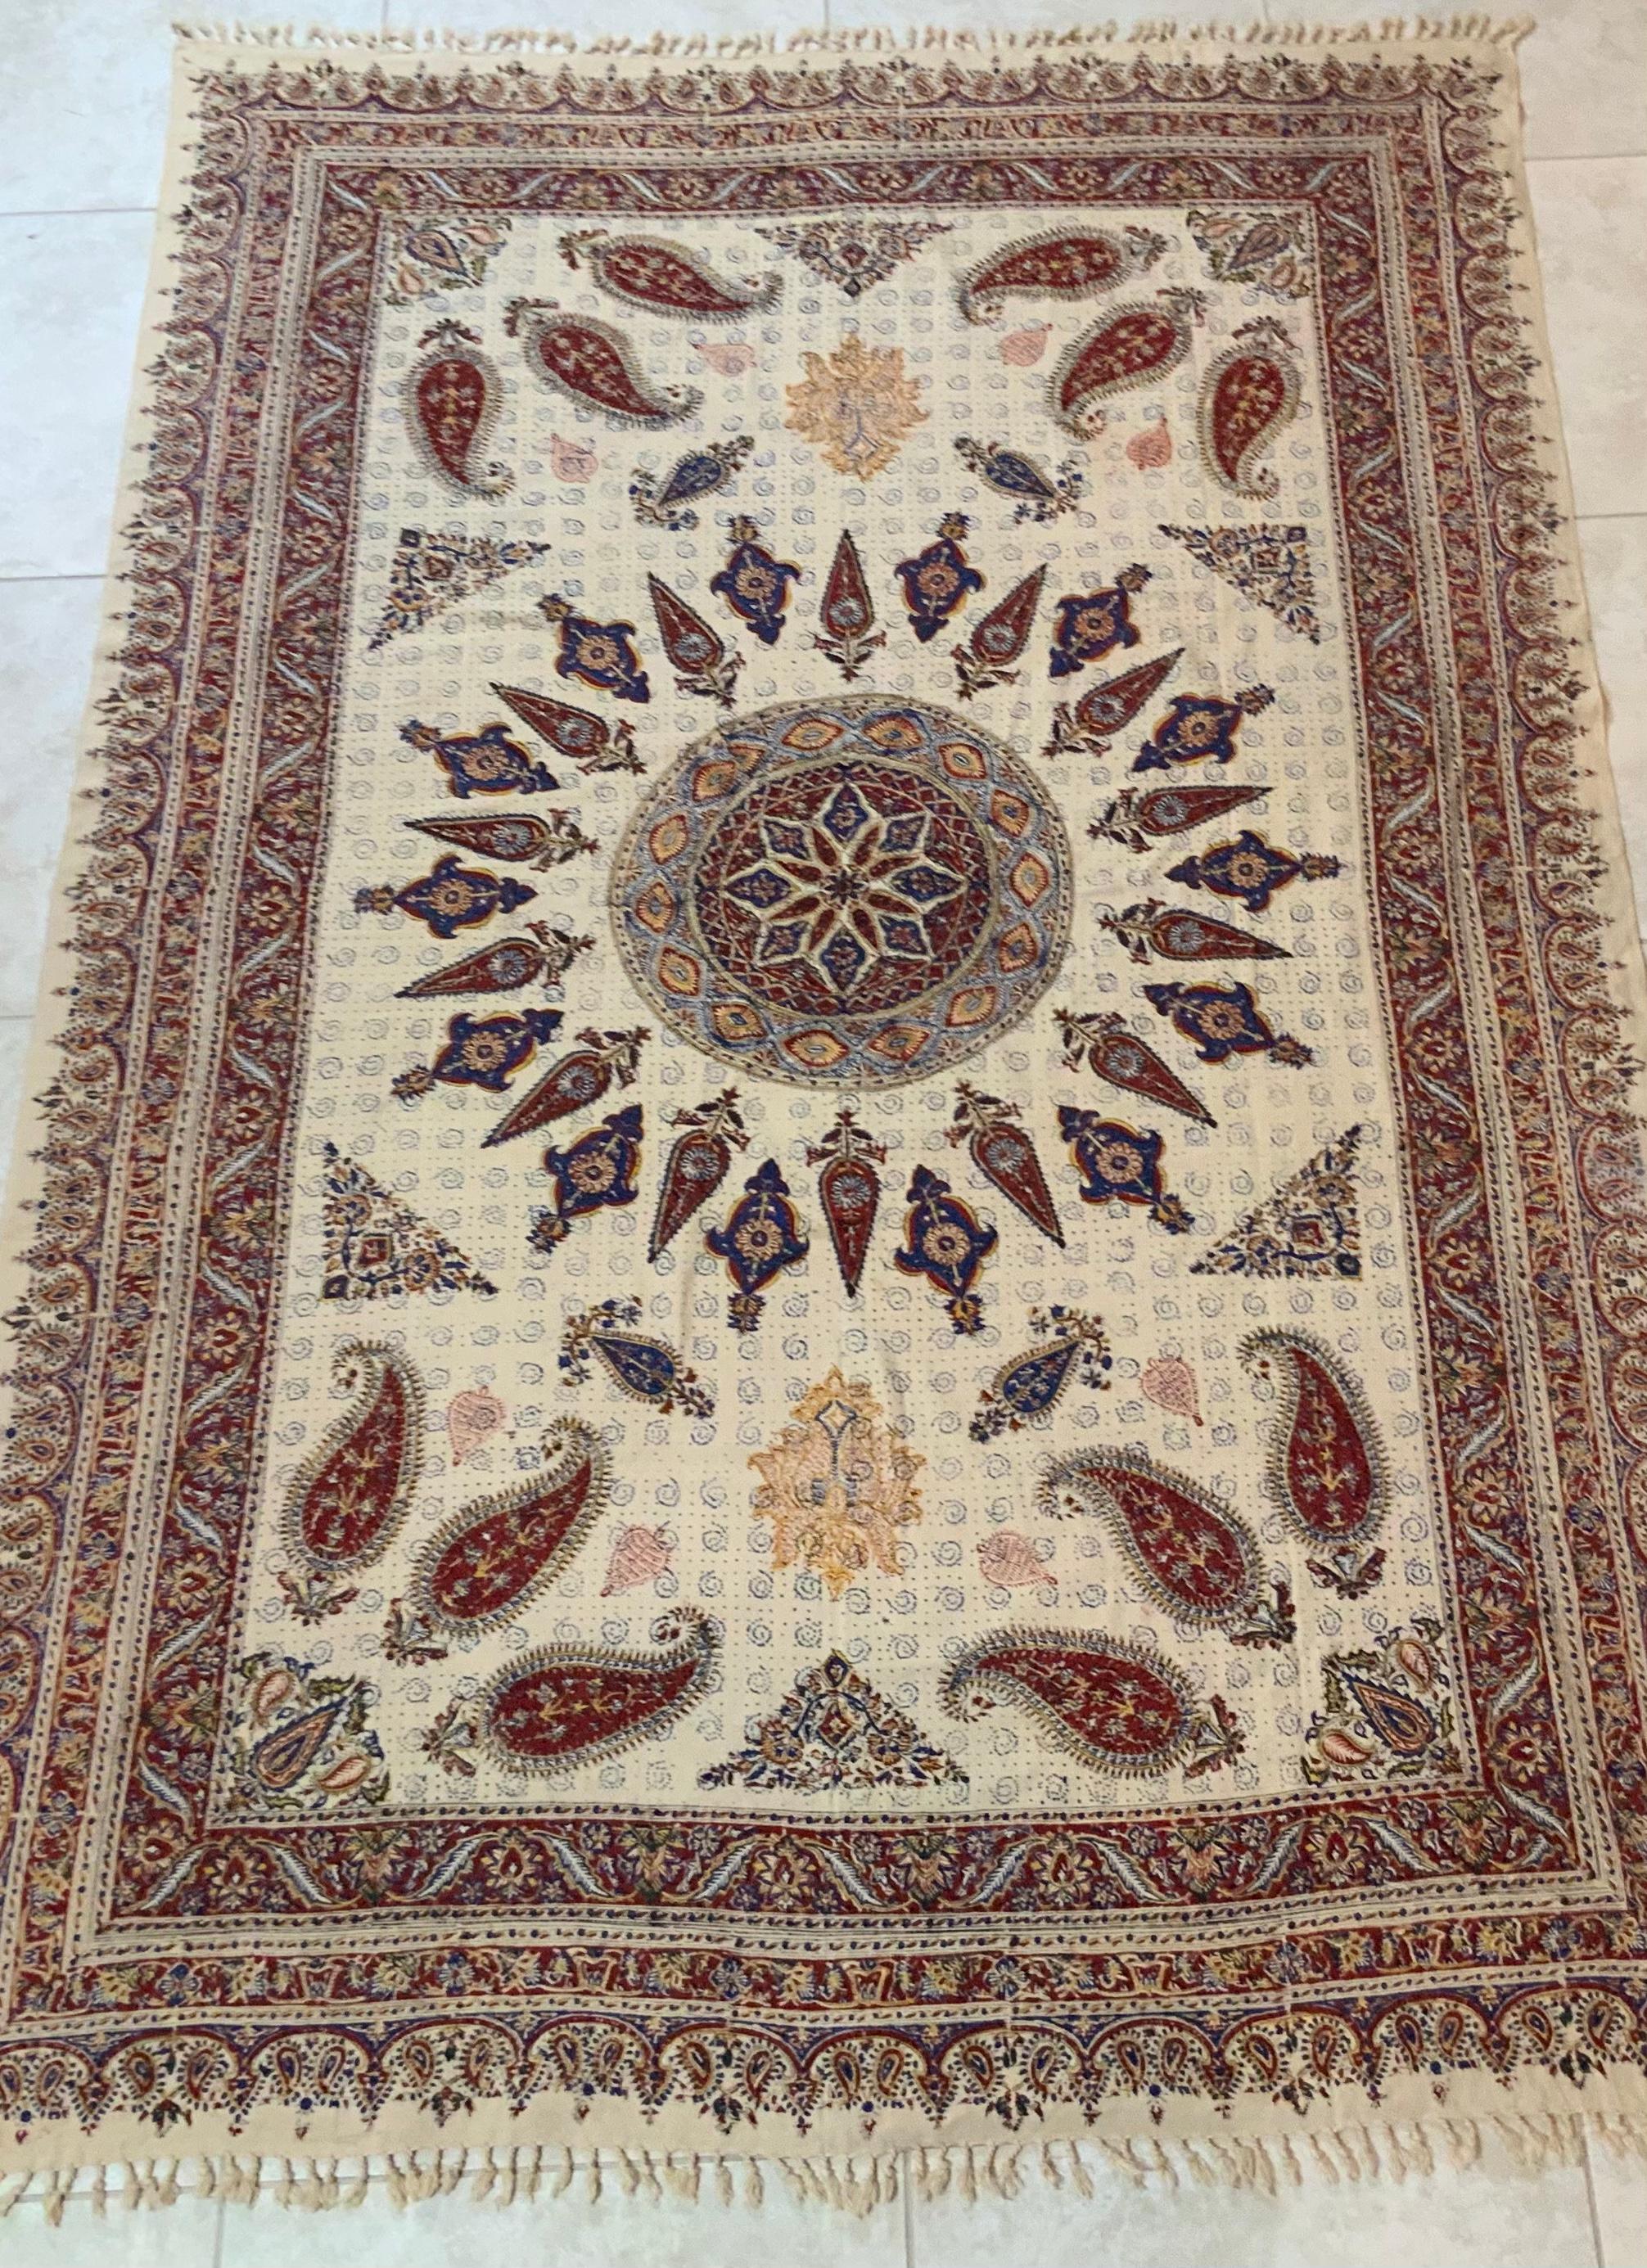 Large Old Persian textile from Isfahan Iran, with bothe paisley imprint motifs beautiful round center
with light blue red salmon colors on cream background.
Professionally cleaned and new silk backing.
Could use as tablecloth, wall hanging